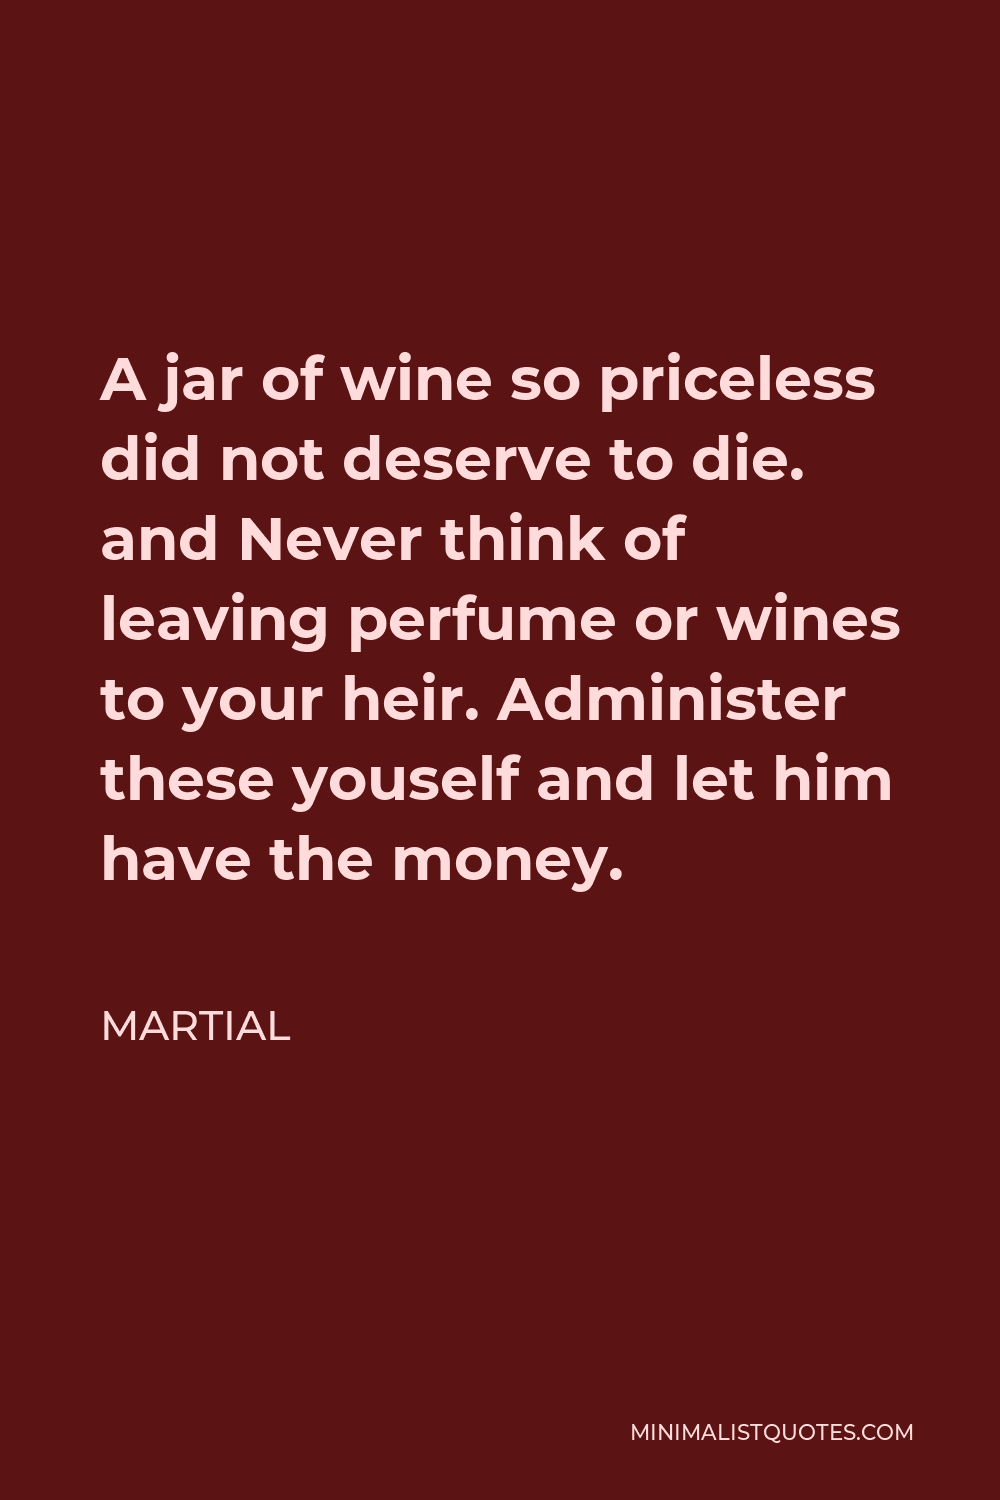 Martial Quote - A jar of wine so priceless did not deserve to die. and Never think of leaving perfume or wines to your heir. Administer these youself and let him have the money.